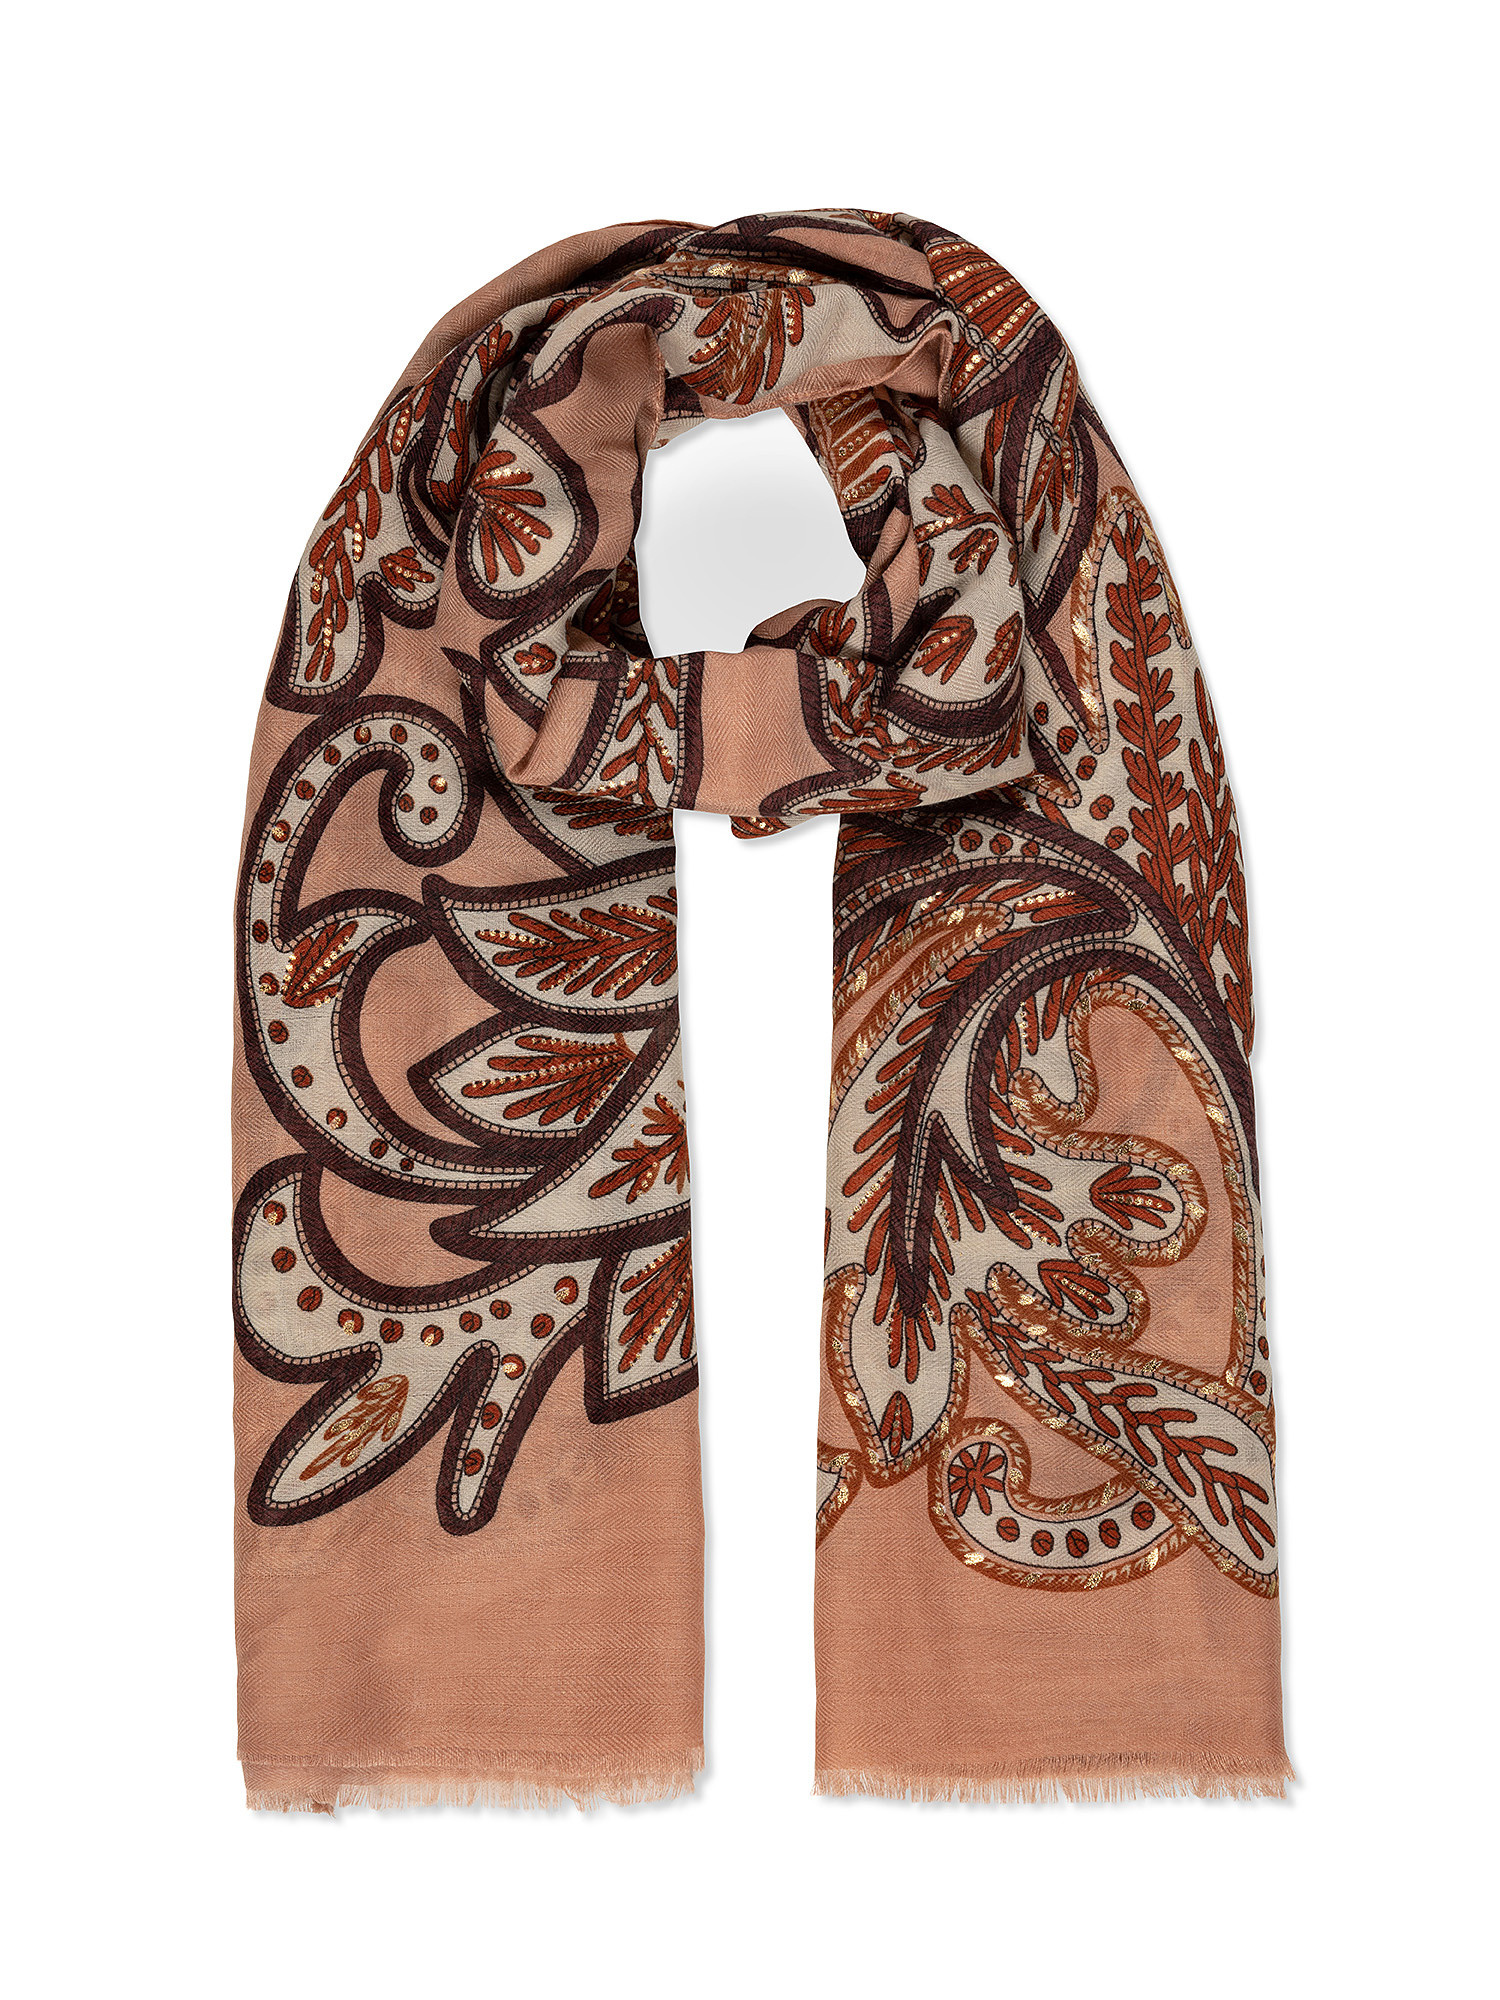 Koan - Scarf with floral print, Pink, large image number 0